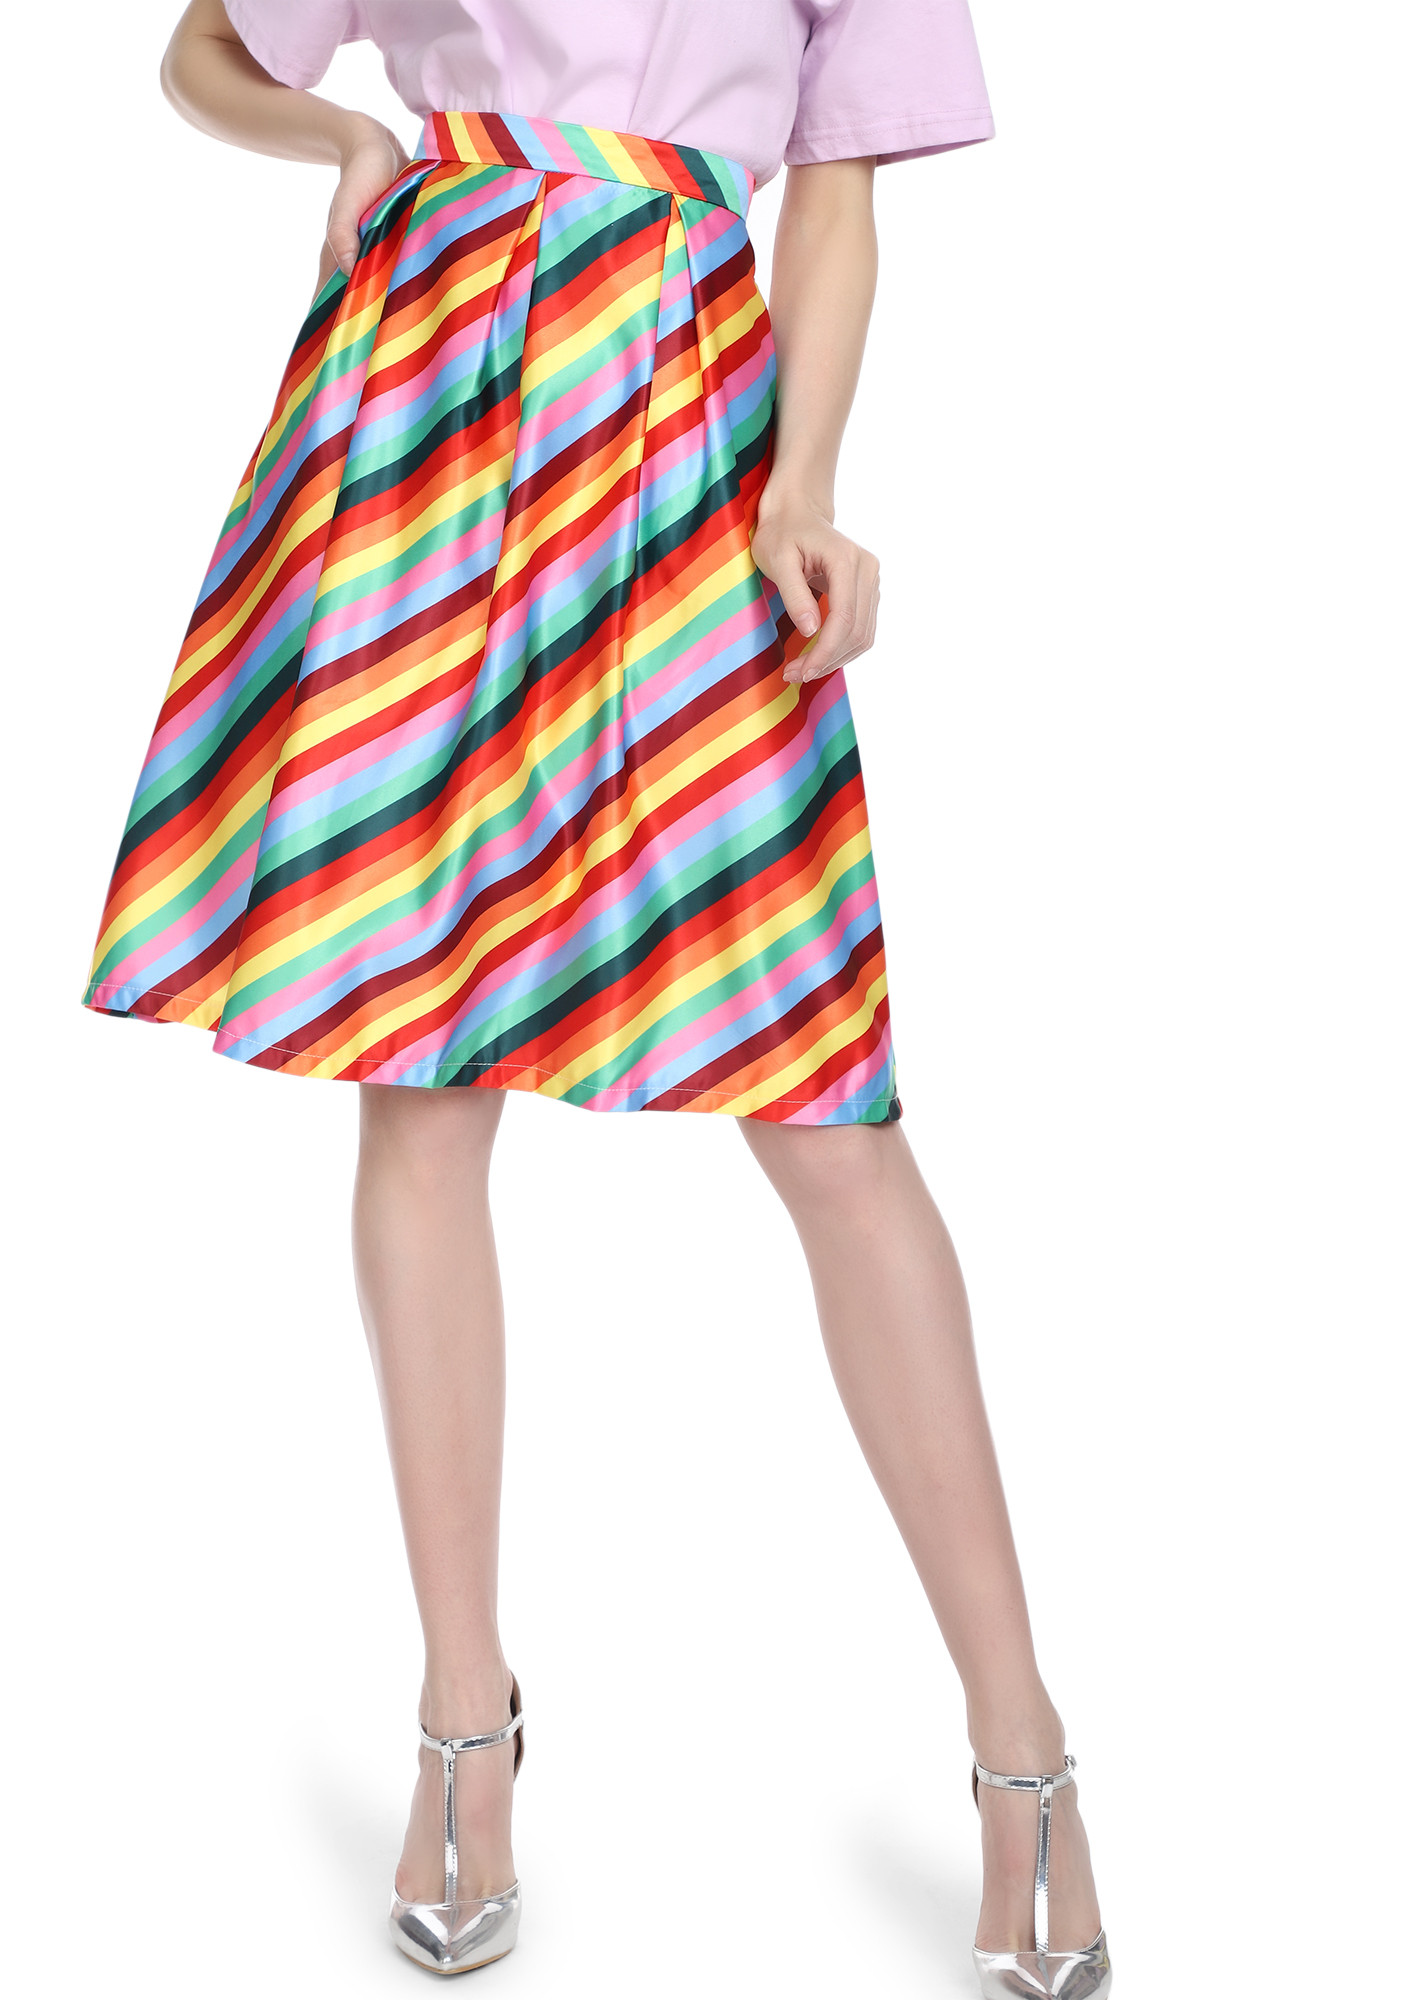 LOOKING FOR A RAINBOW MULTICOLOR SKATER SKIRT